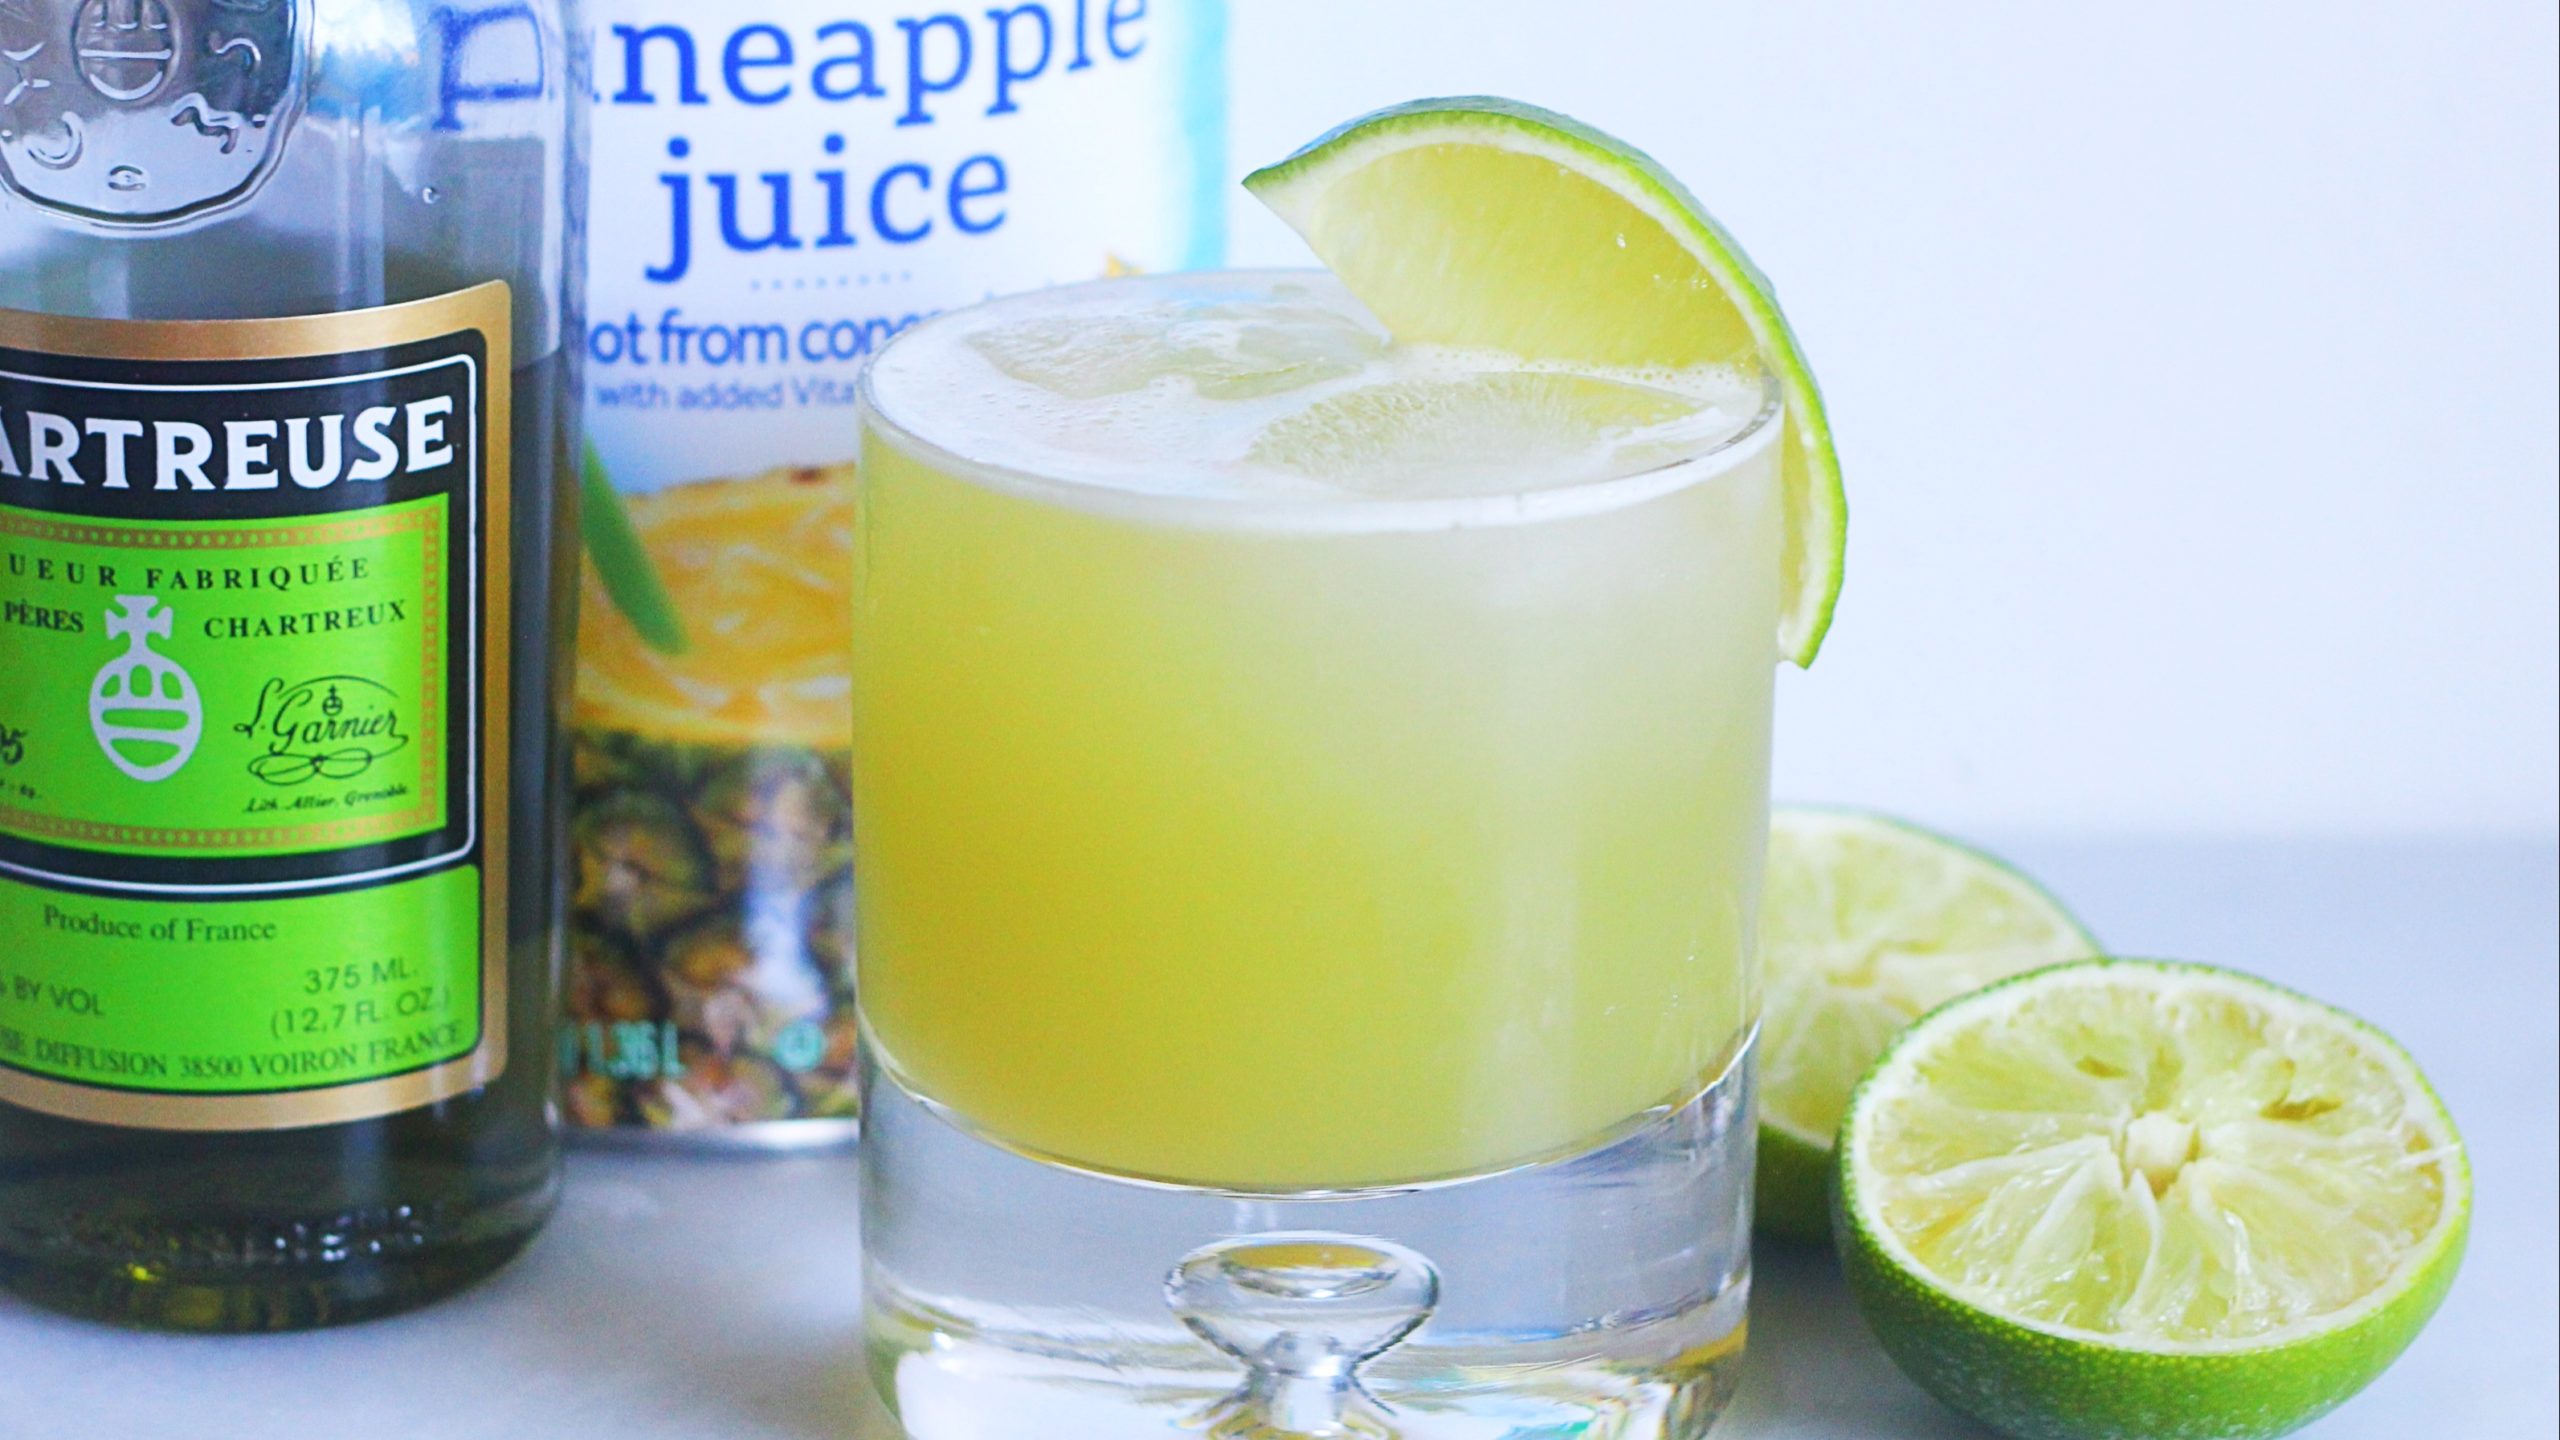 Give Herbal Liqueurs a Tropical Vibe With Whipped Pineapple Juice